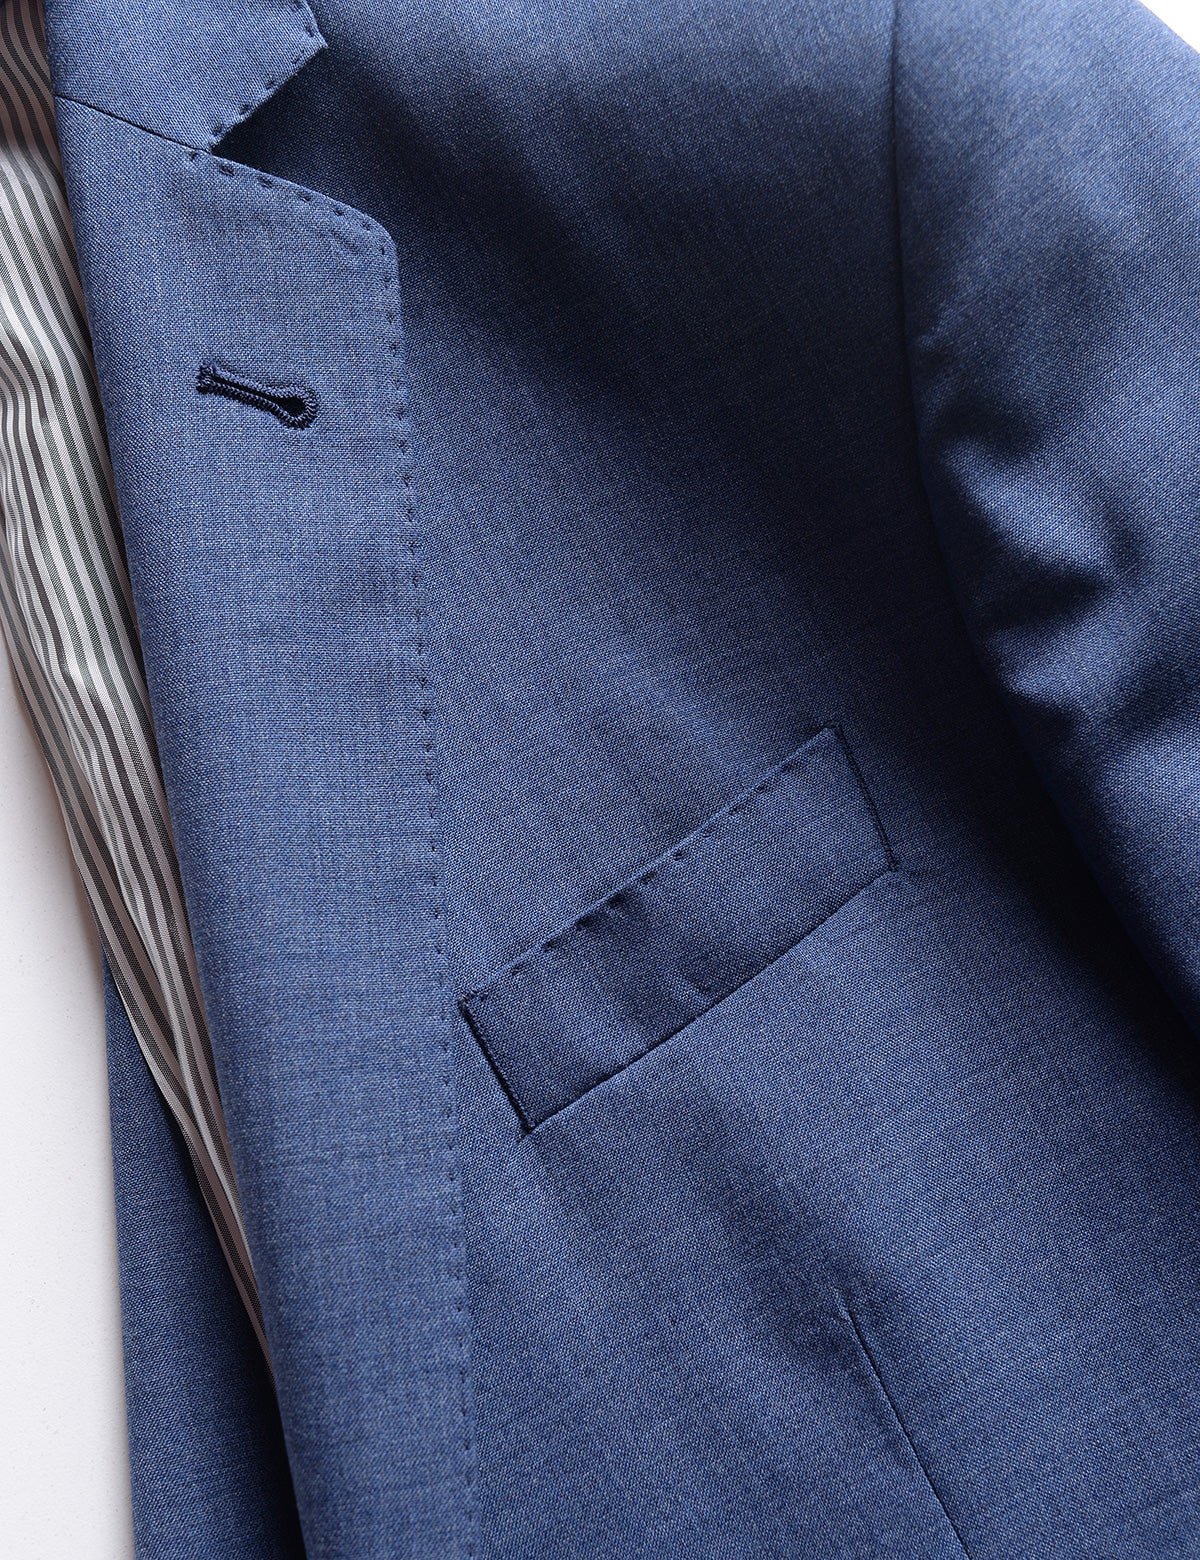 Detail shot of Brooklyn Tailors BKT50 Tailored Jacket in Heathered Wool - San Marino Blue showing lining, lapel, chest pocket, and fabric texture